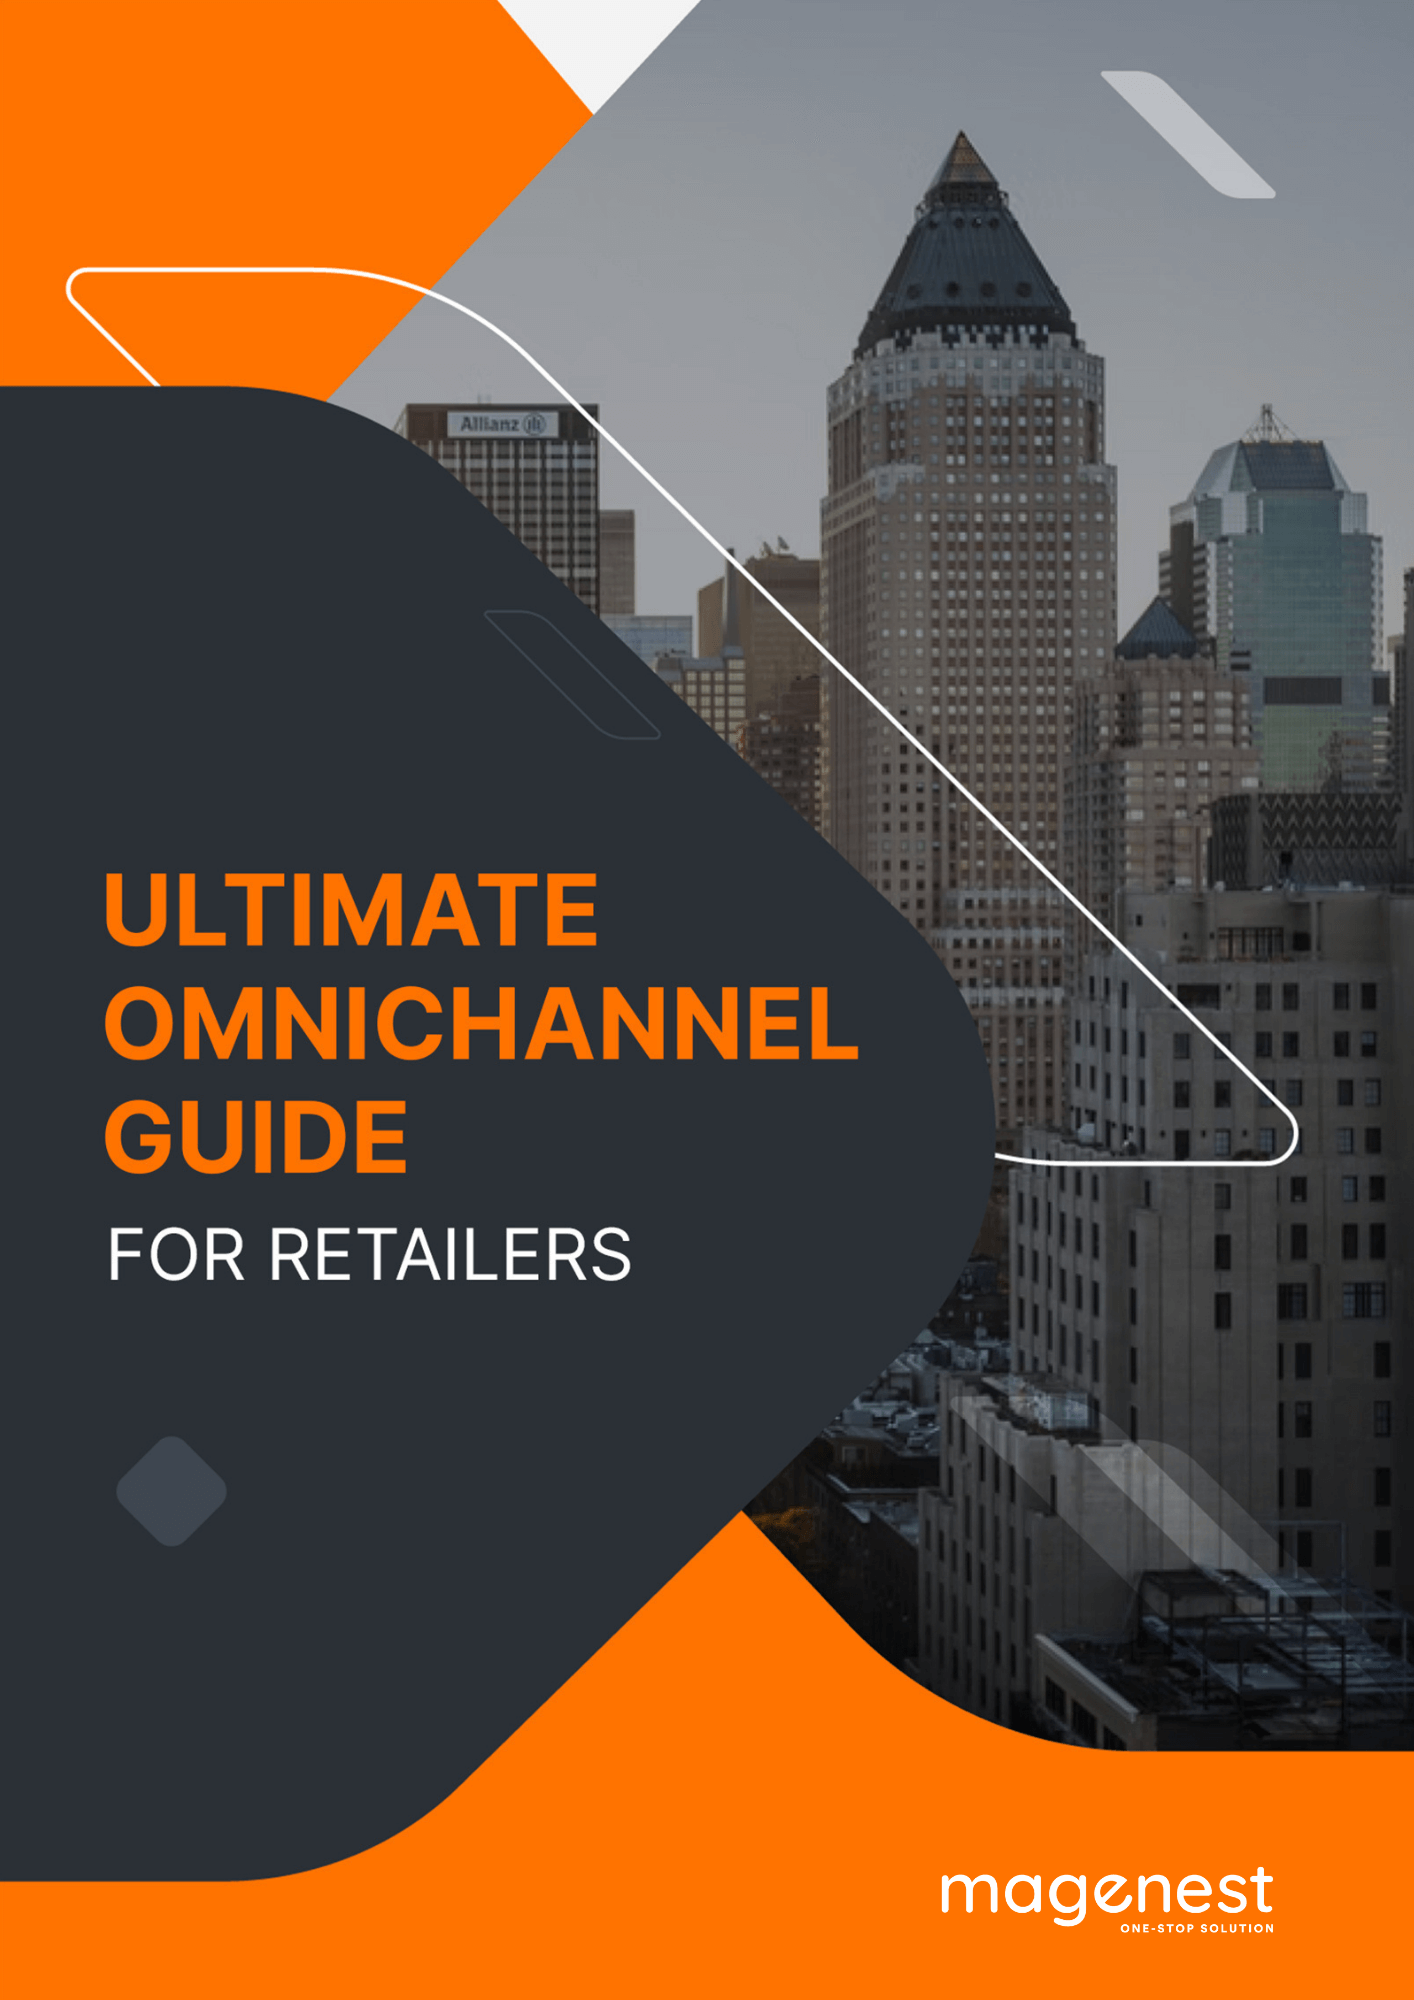 eBook: Ultimate Omnichannel Guide for Retailers0